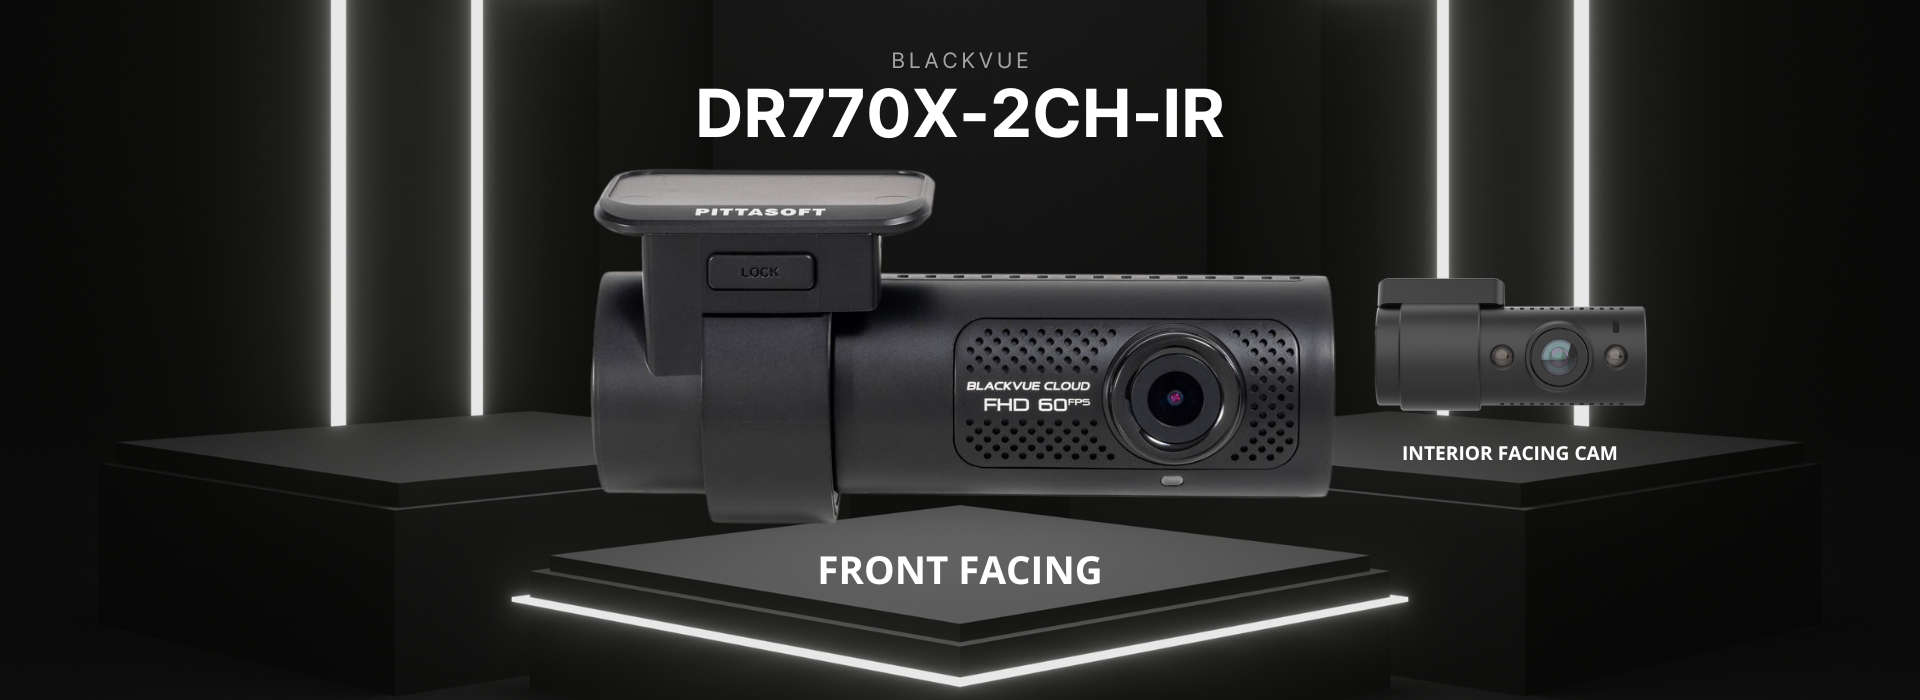 BlackVue DR770X-2CH-IR | For Front + Interior Recording